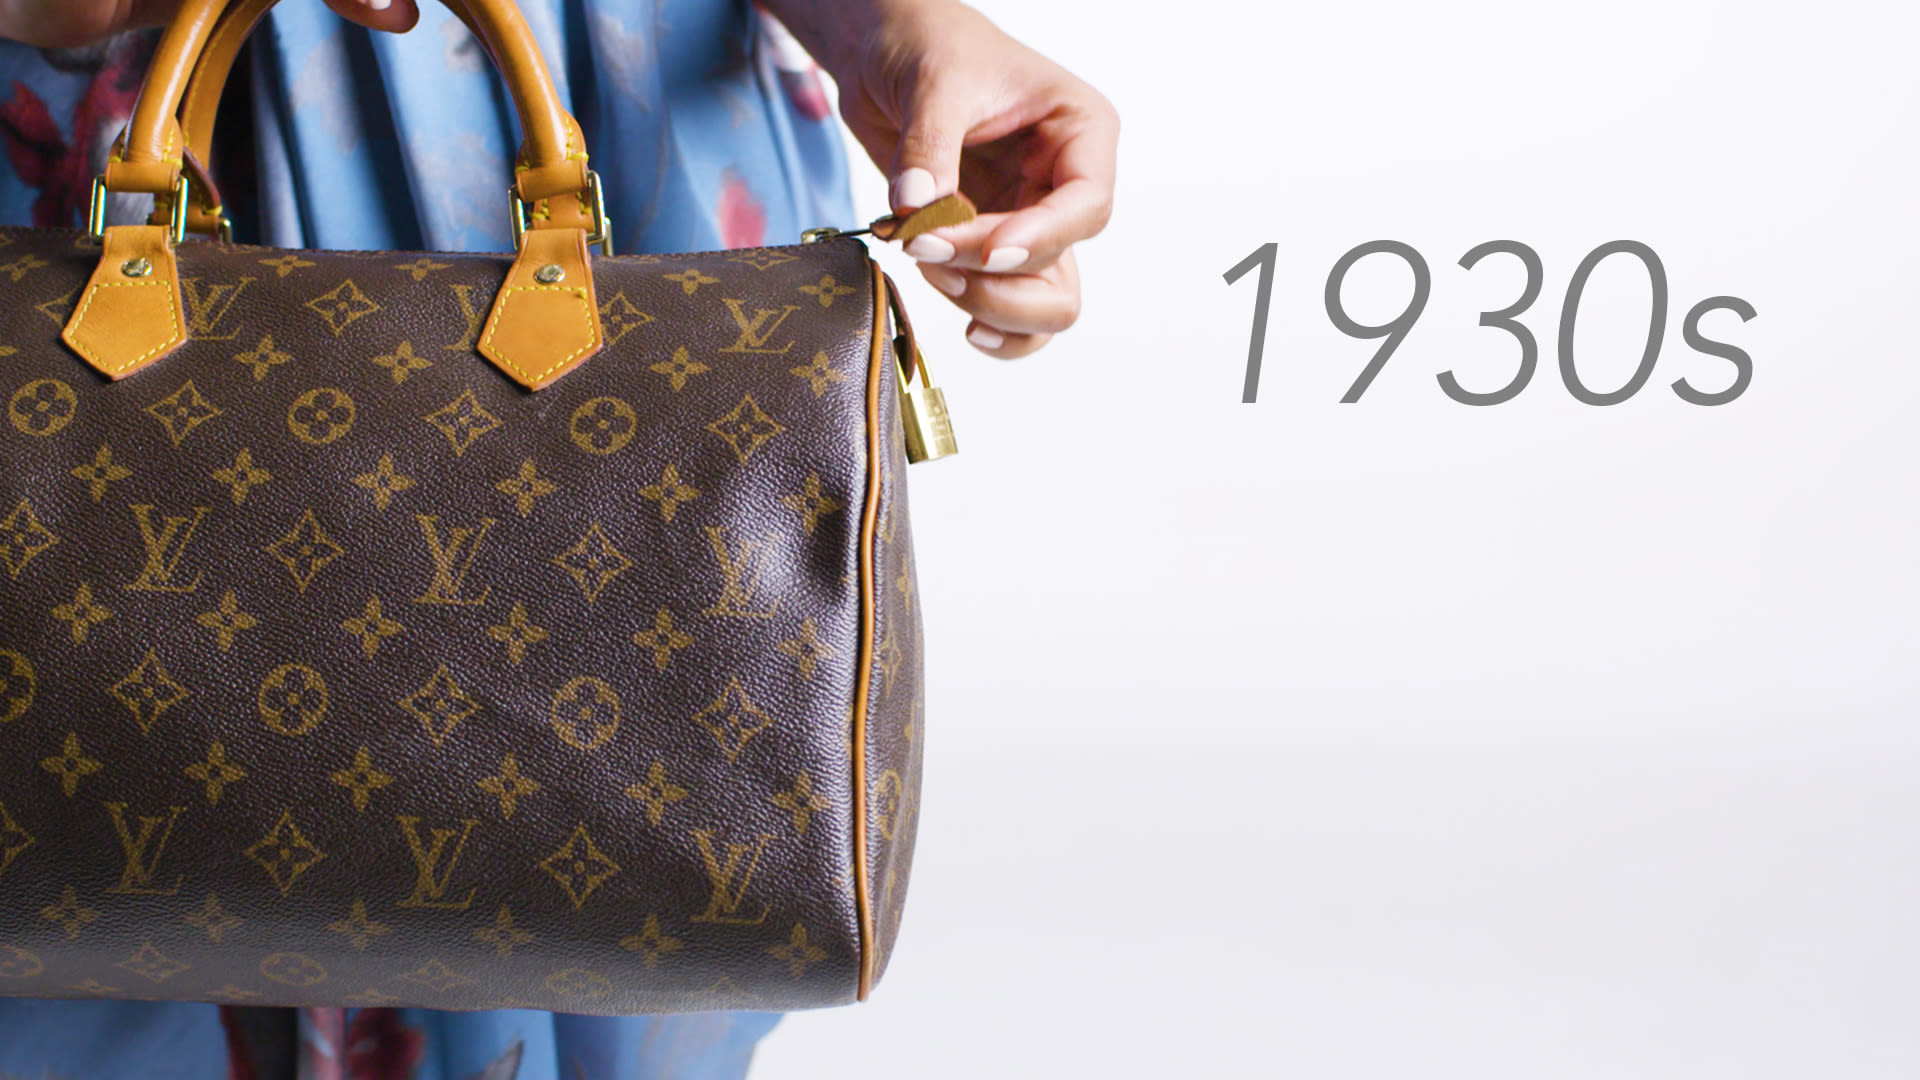 This 100 years of handbags vid shows what we carried in our purses